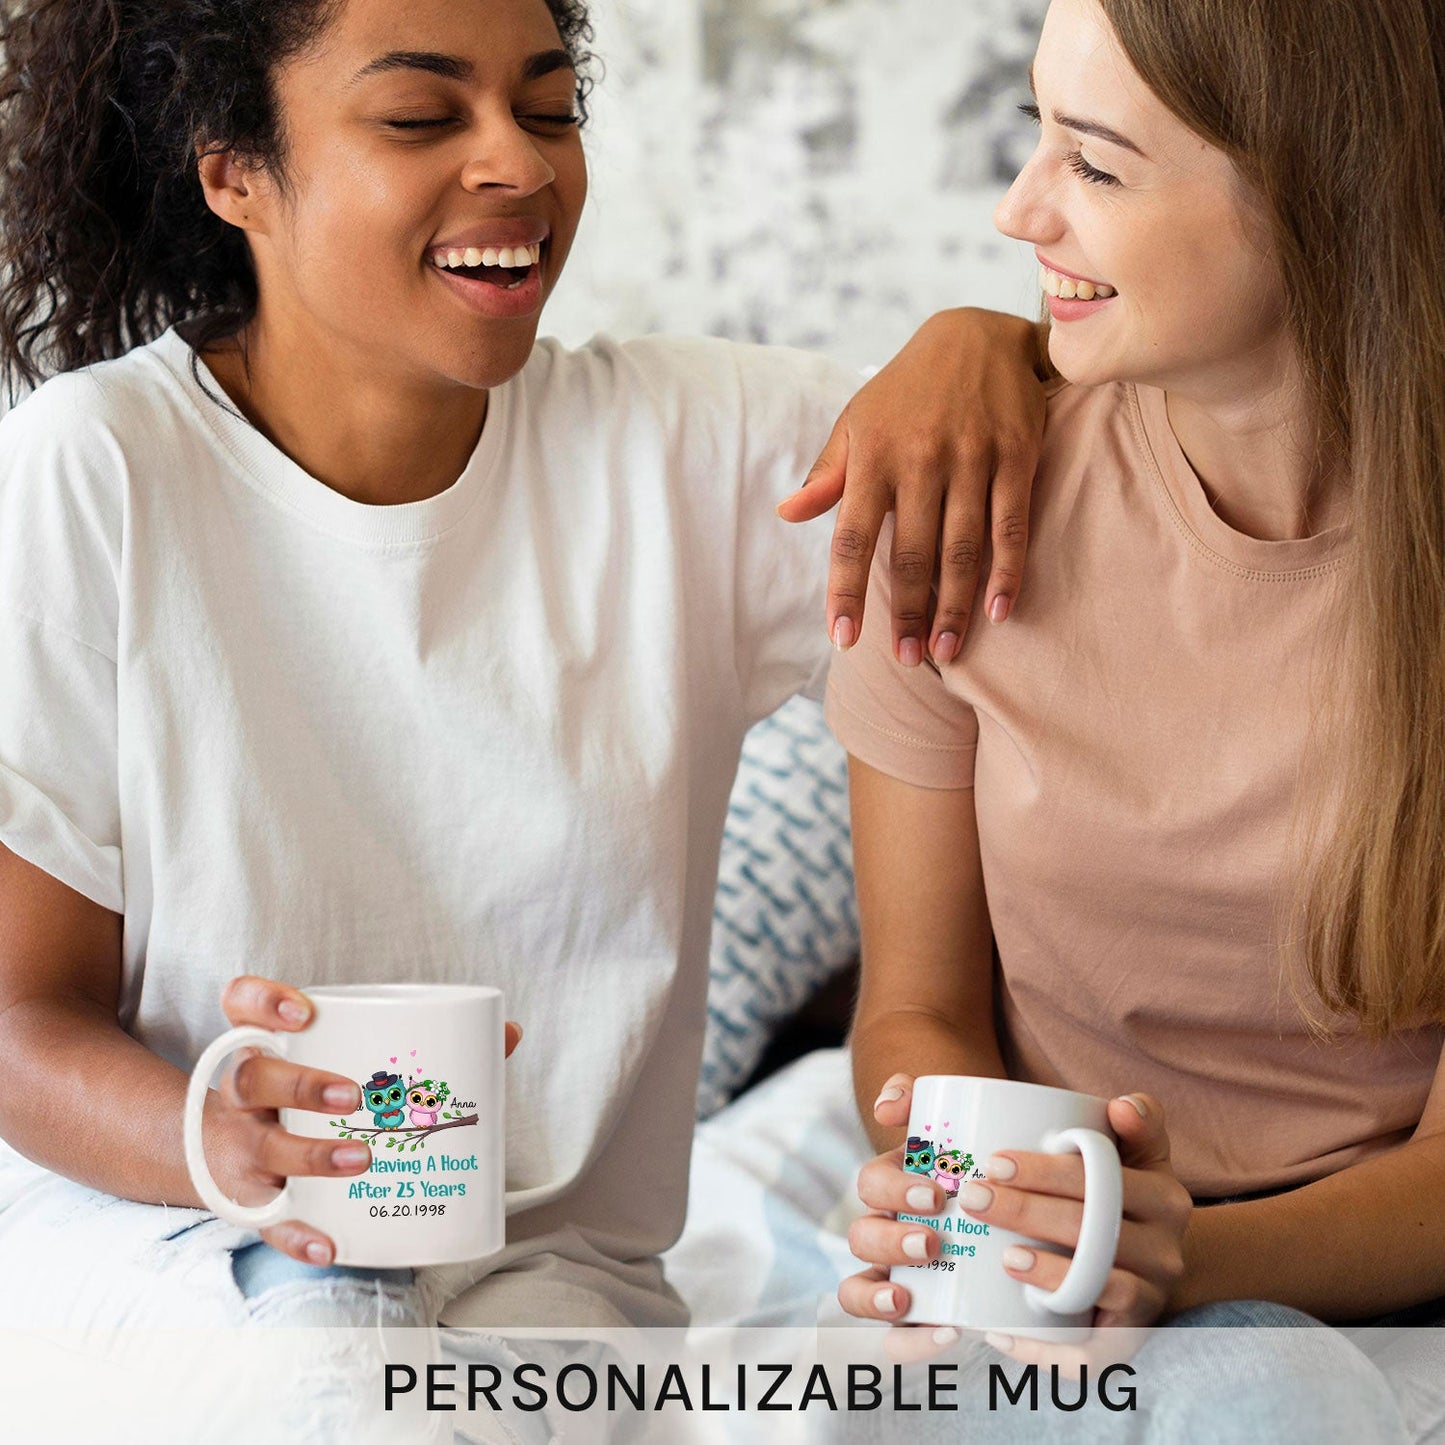 Still Having A Hoot After Twenty-five Years - Personalized 25 Year Anniversary gift for him for her - Custom Mug - MyMindfulGifts